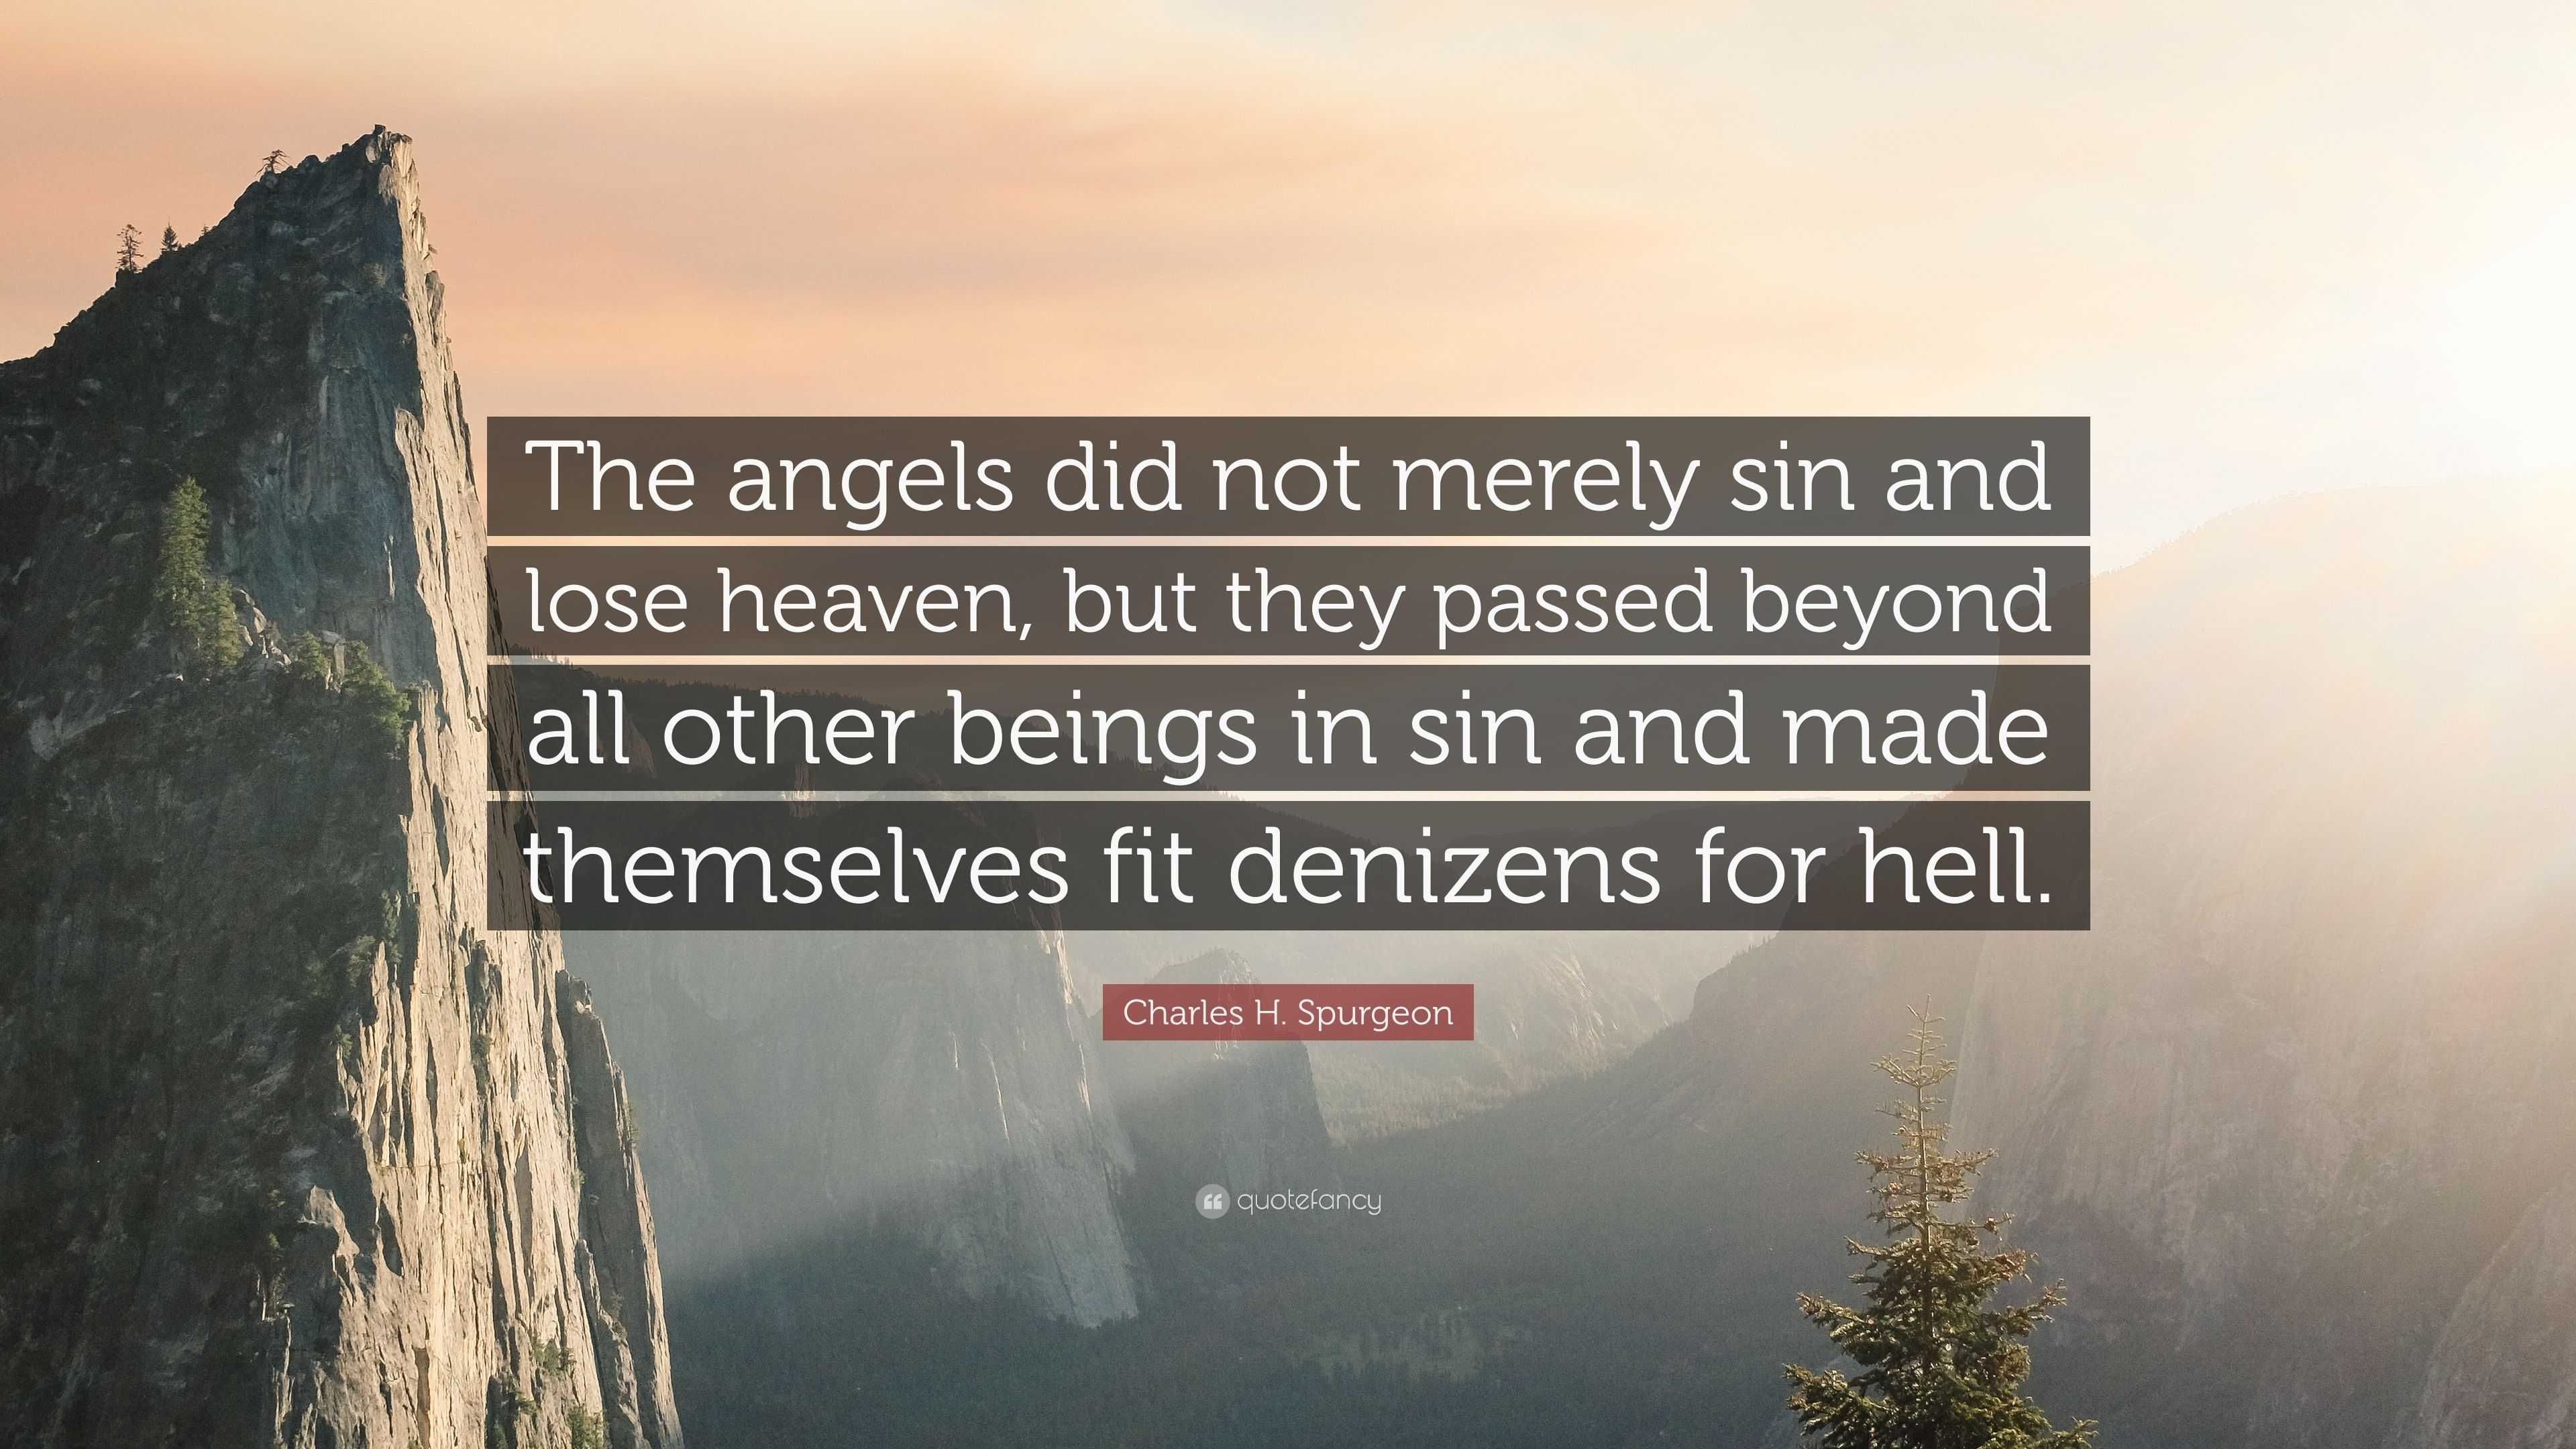 Charles H. Spurgeon Quote: “The angels did not merely sin and lose heaven